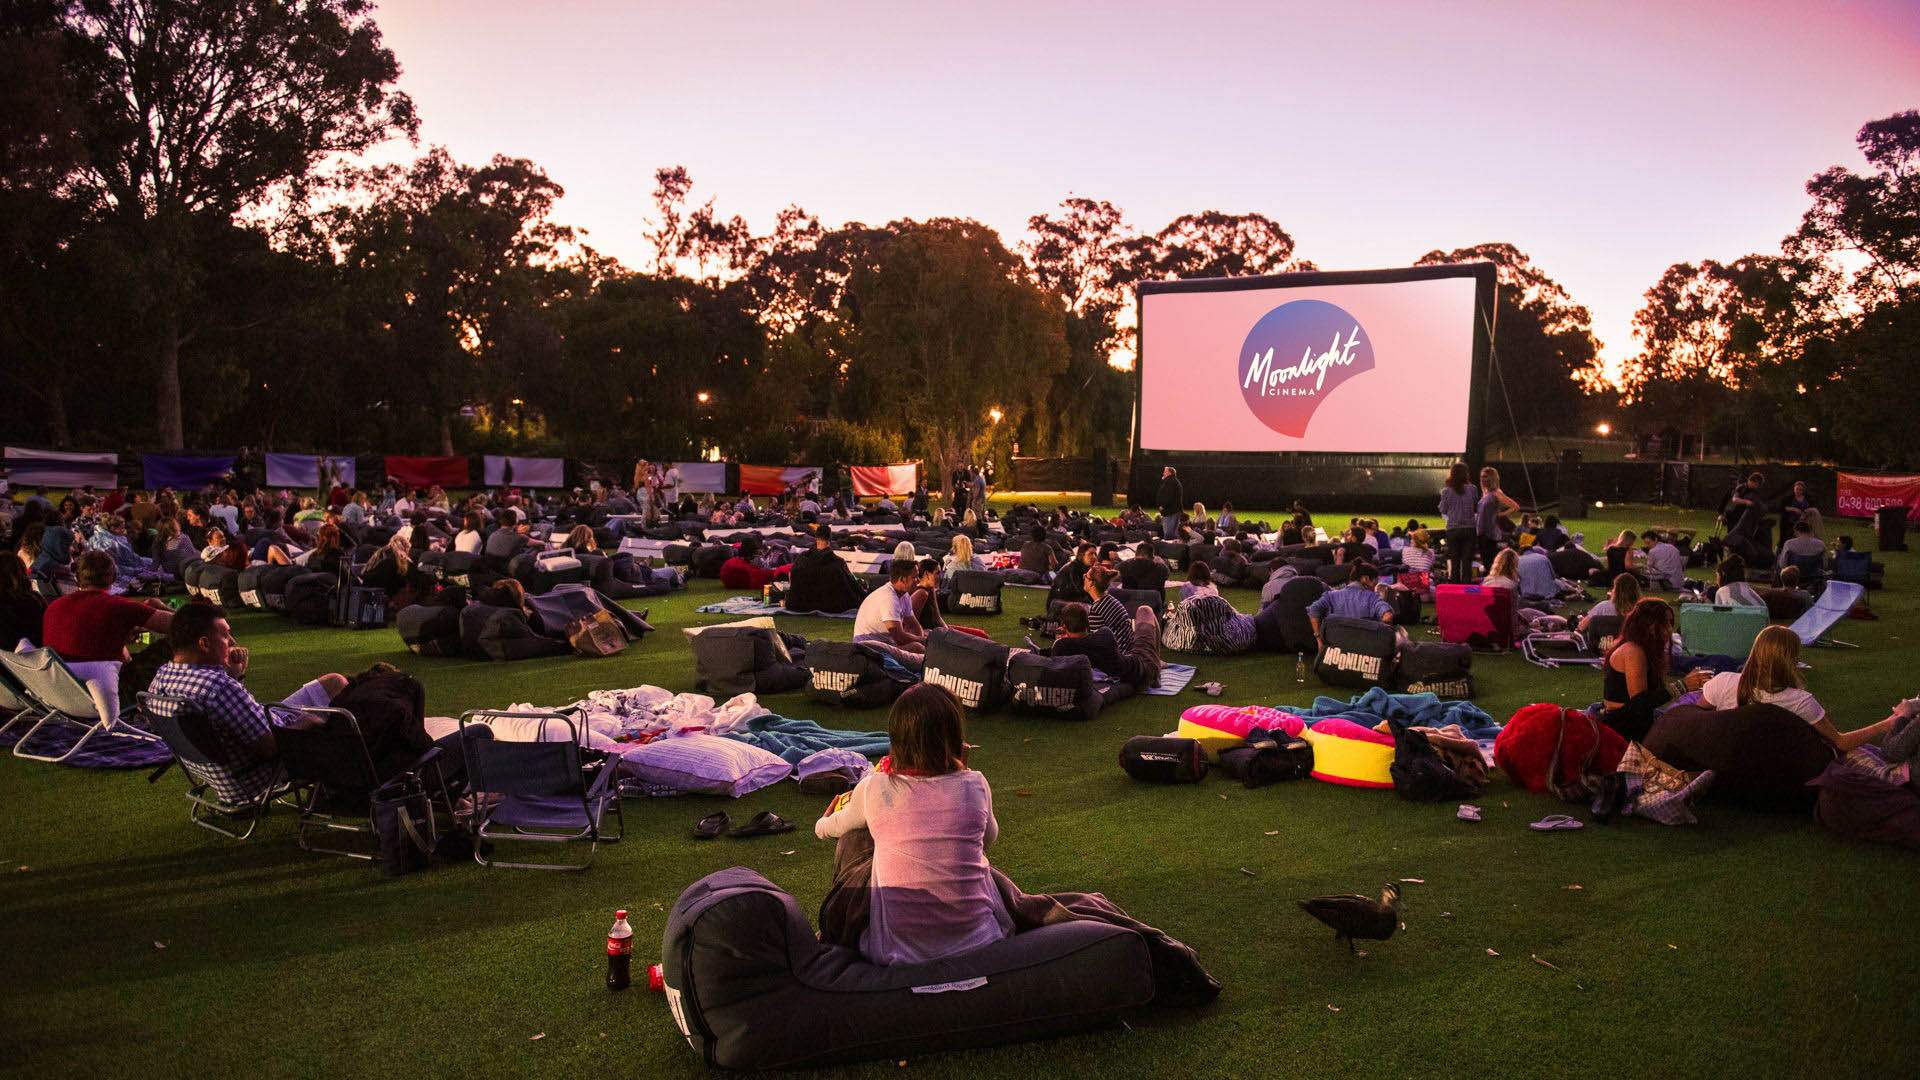 Moonlight Cinema Is Coming Back for Summer 2020